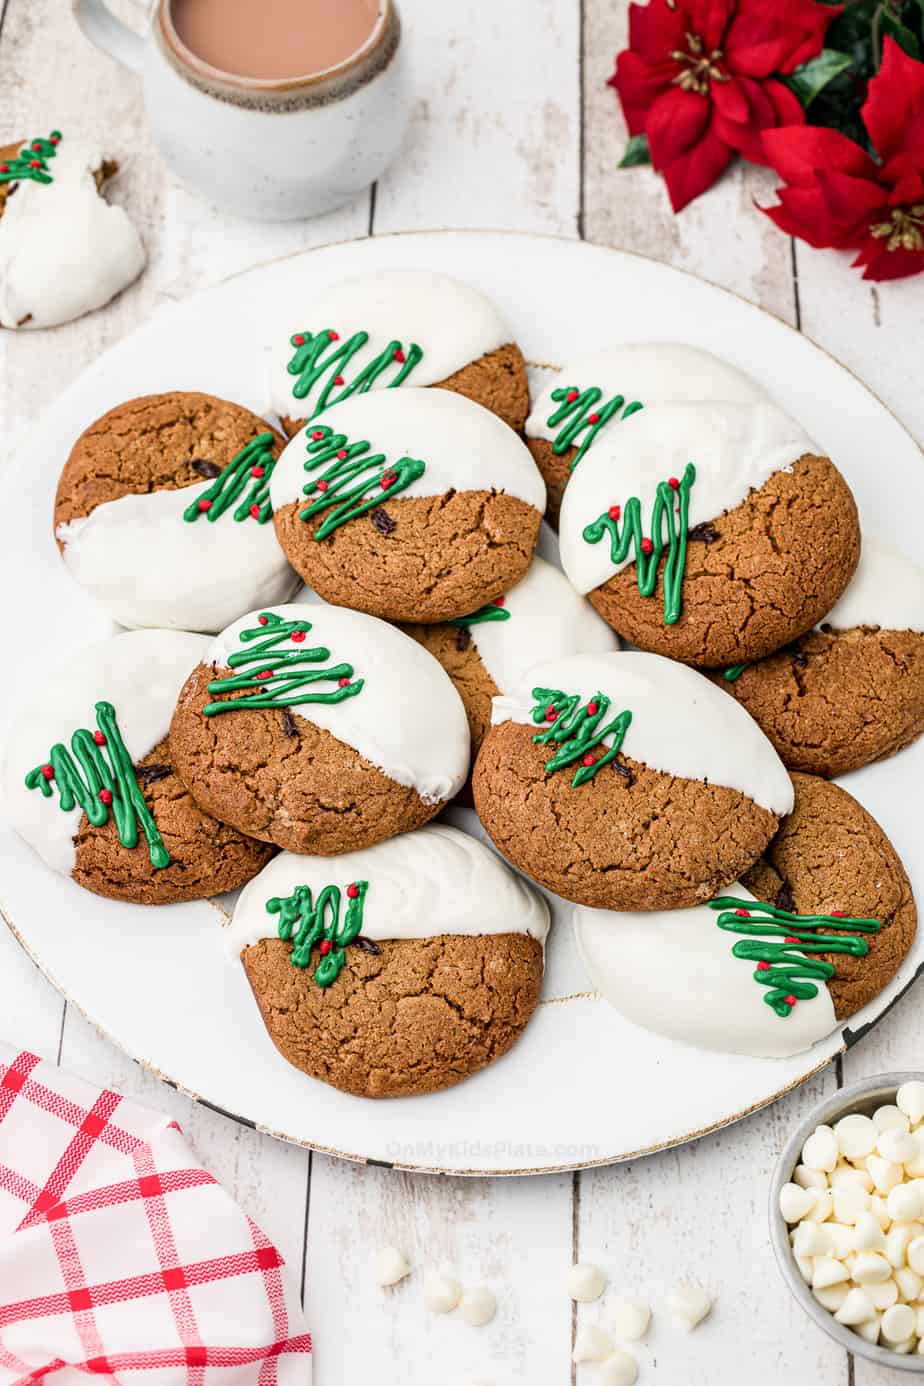 Plate of molasses cookies decorated dipped in white chocolate and decorated with Christmas trees.